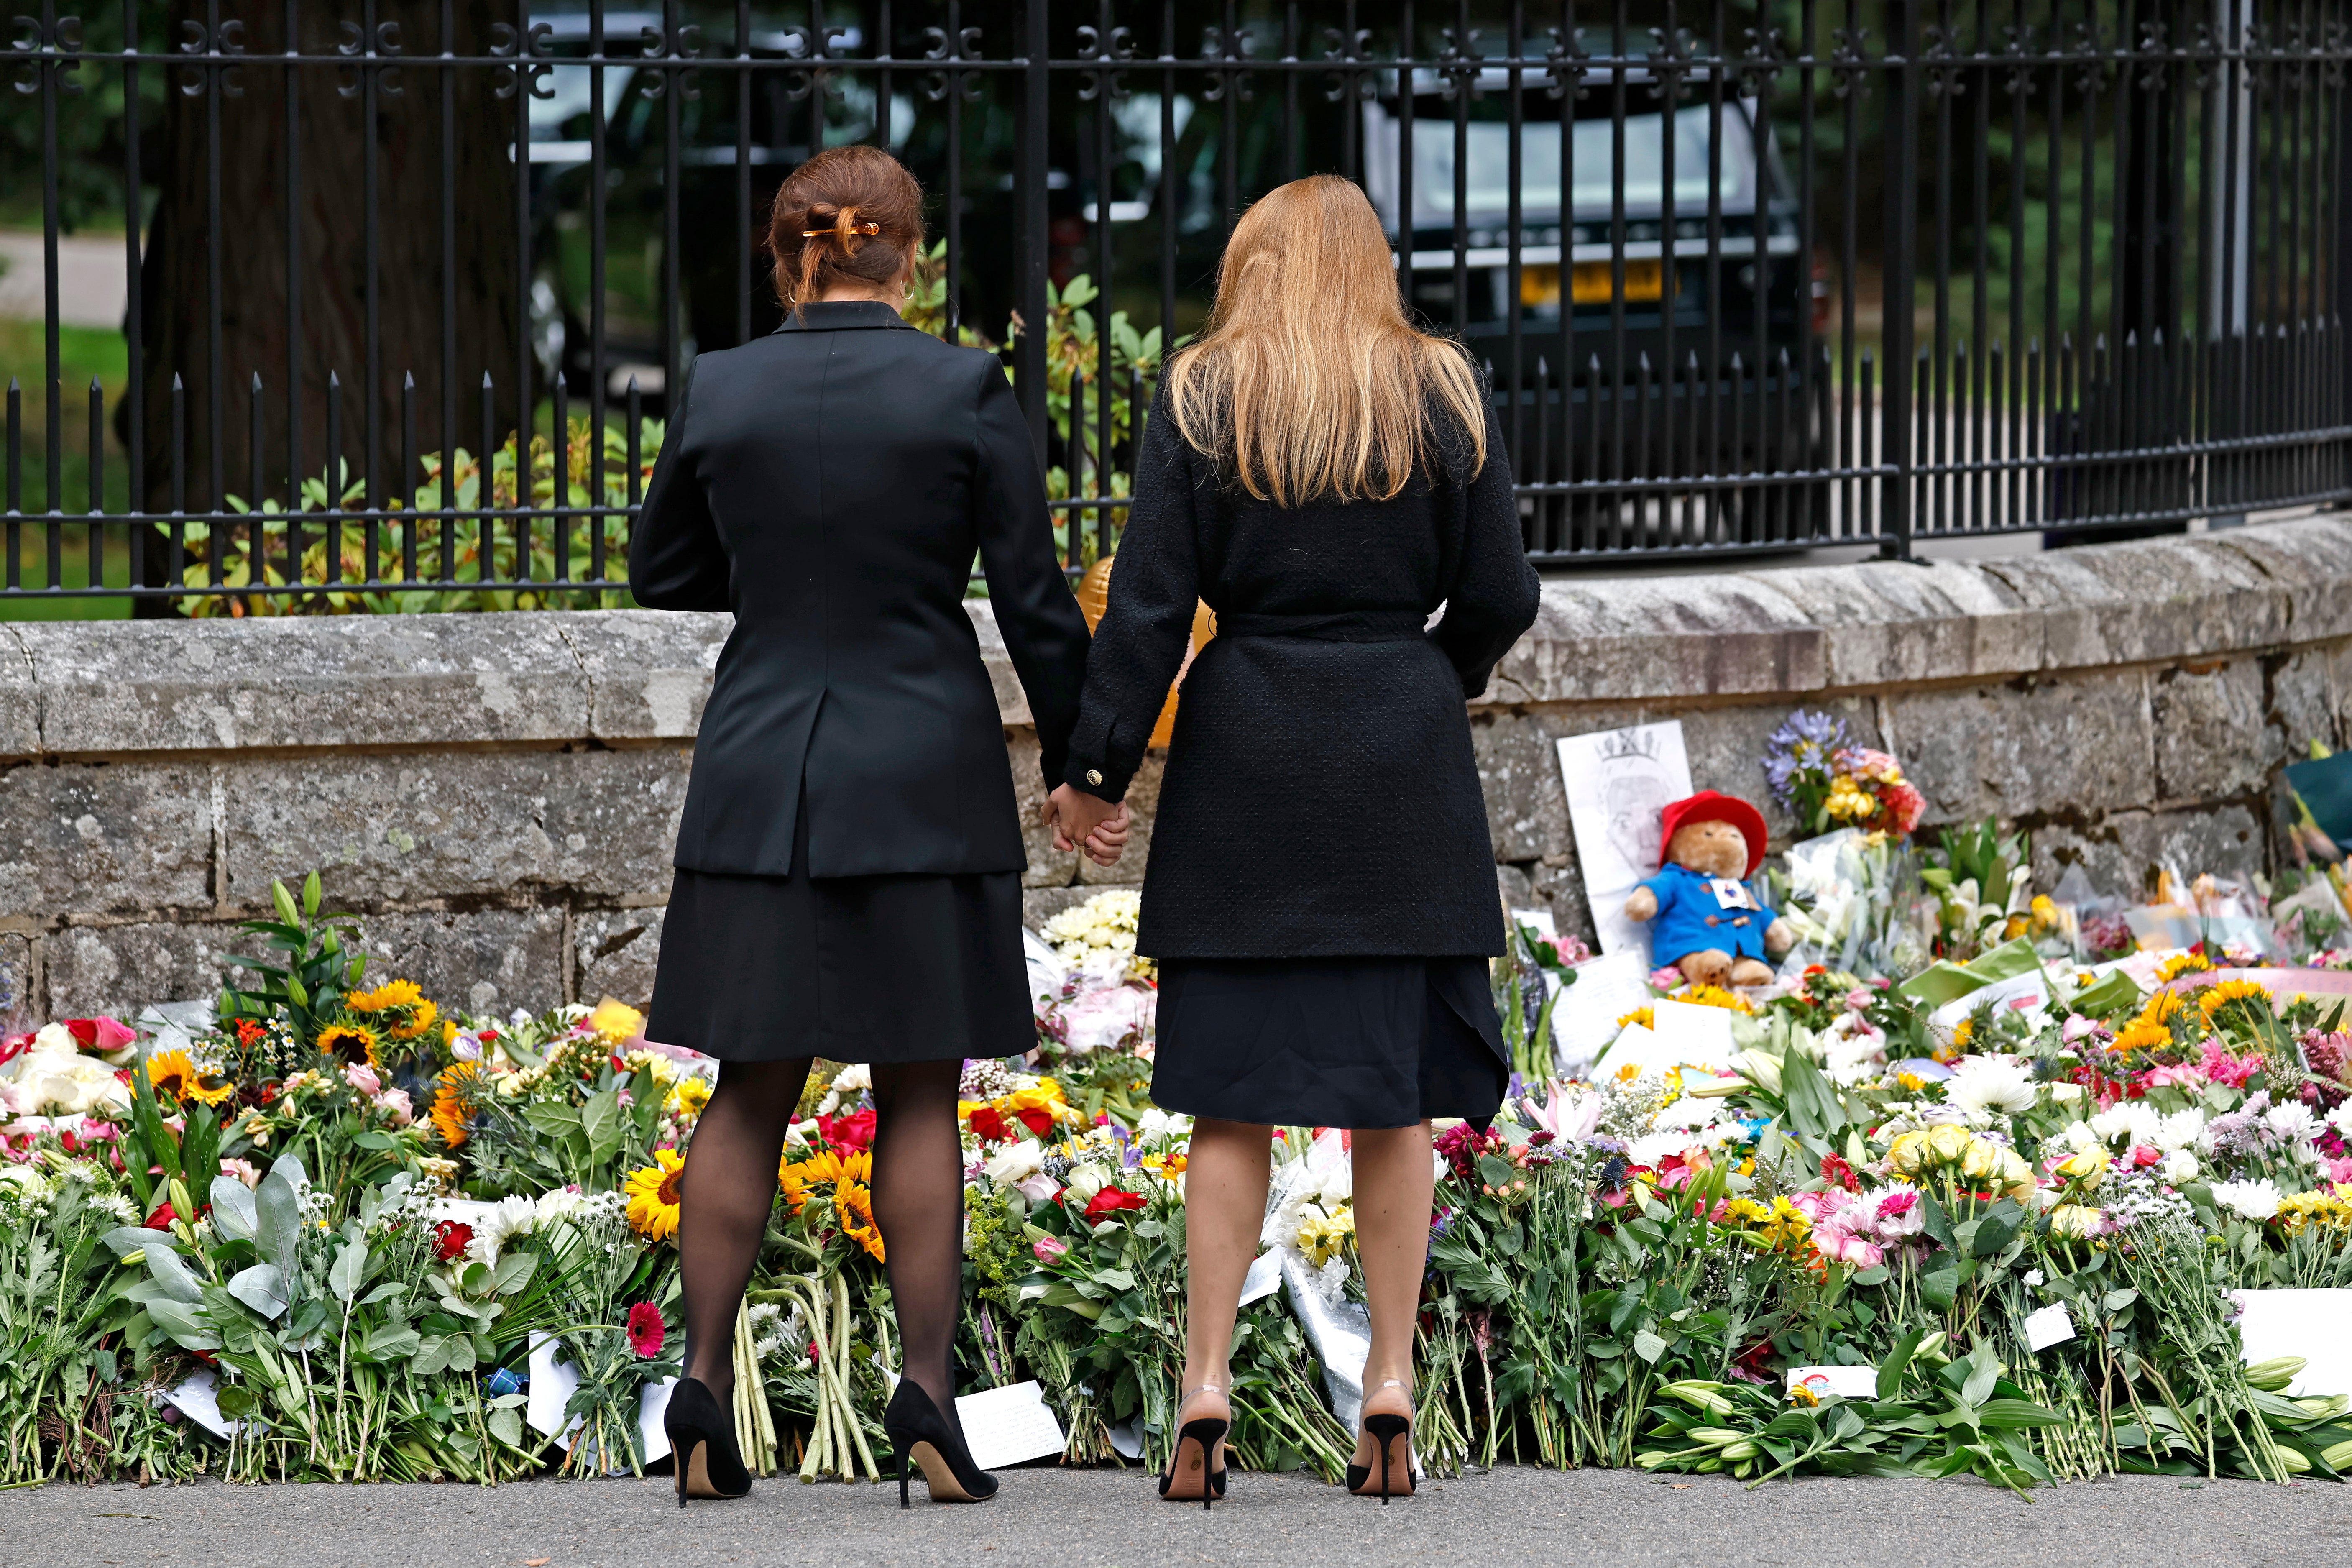 The sisters spent time looking at the masses of flowers left by well wishers